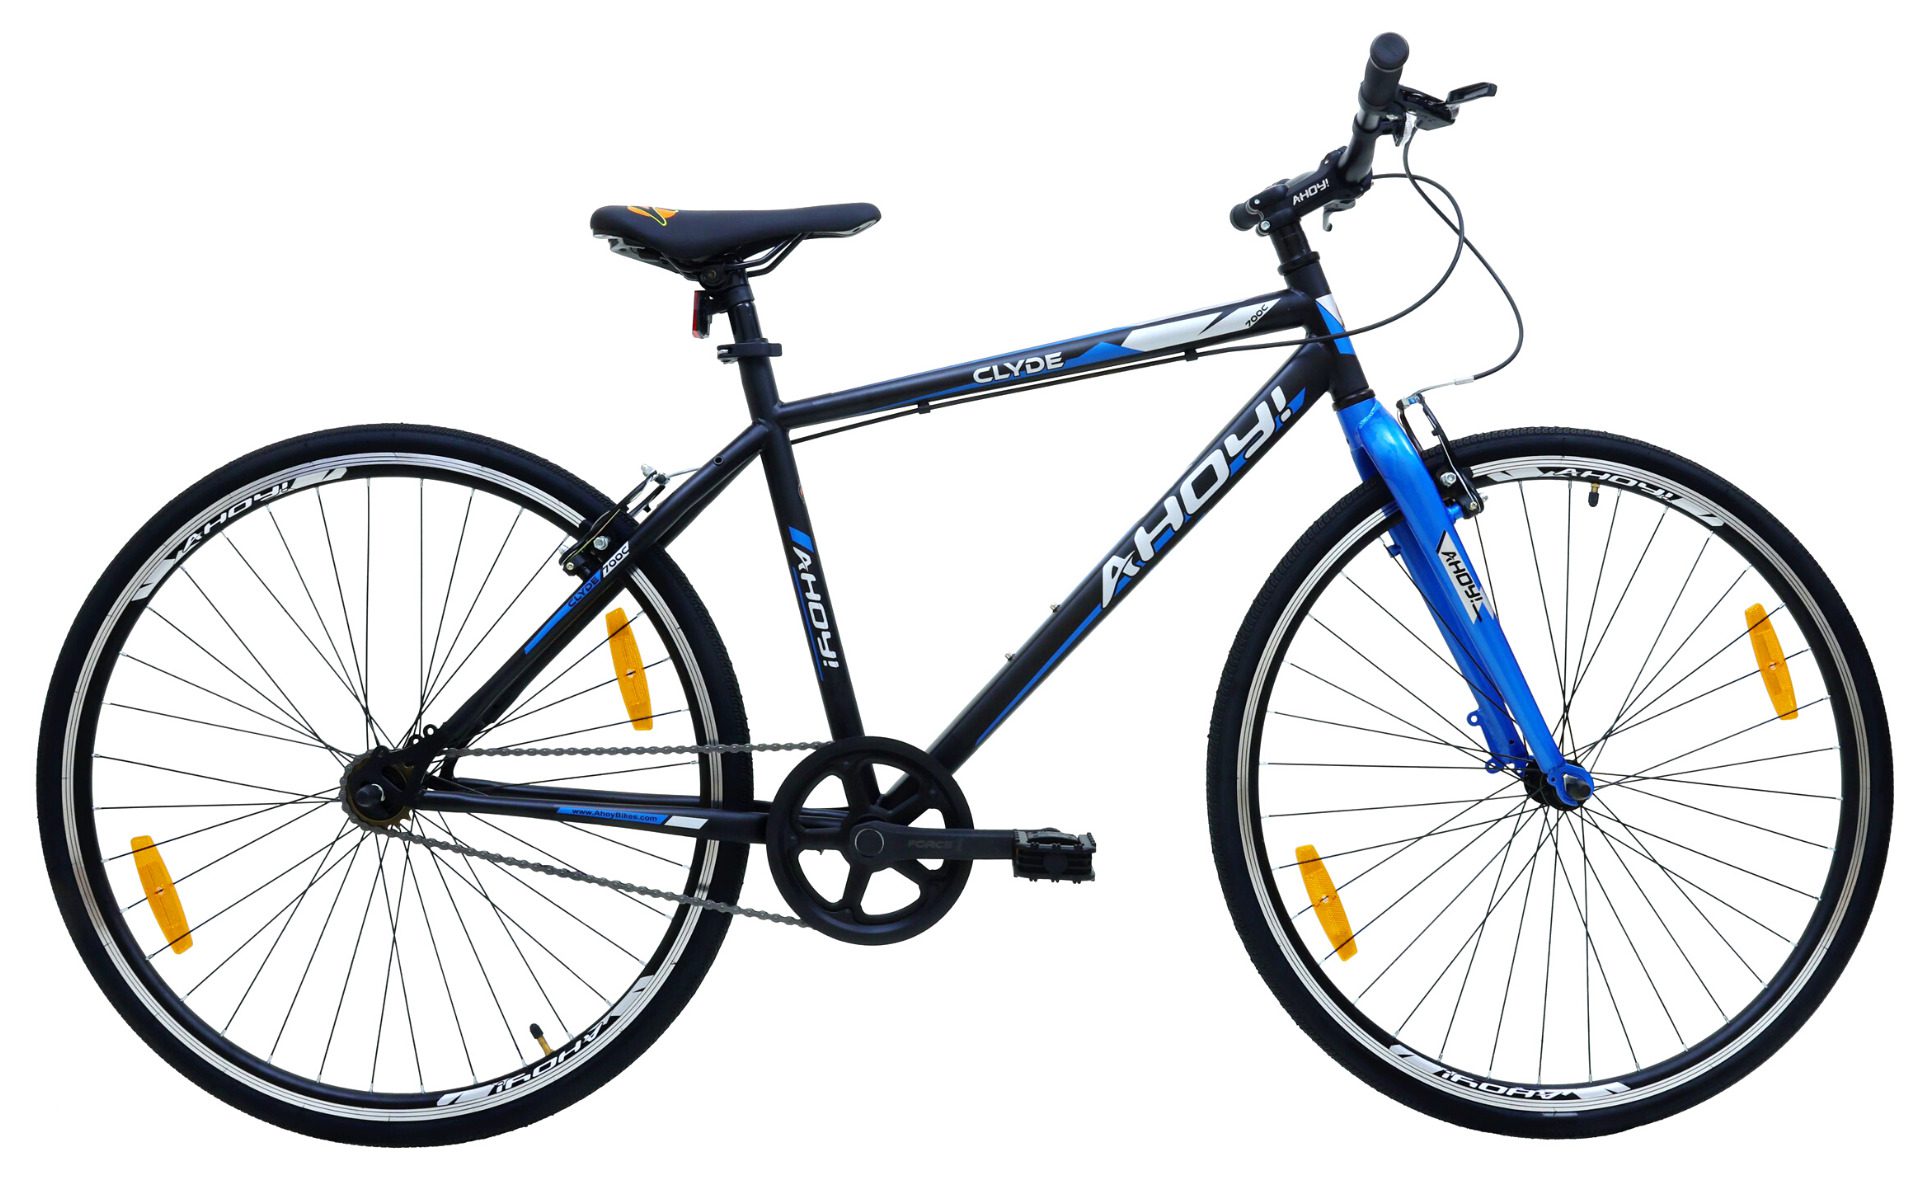 Clyde Hybrid Cycle 700C | Buy Blue Non Gear Bike for Men Online